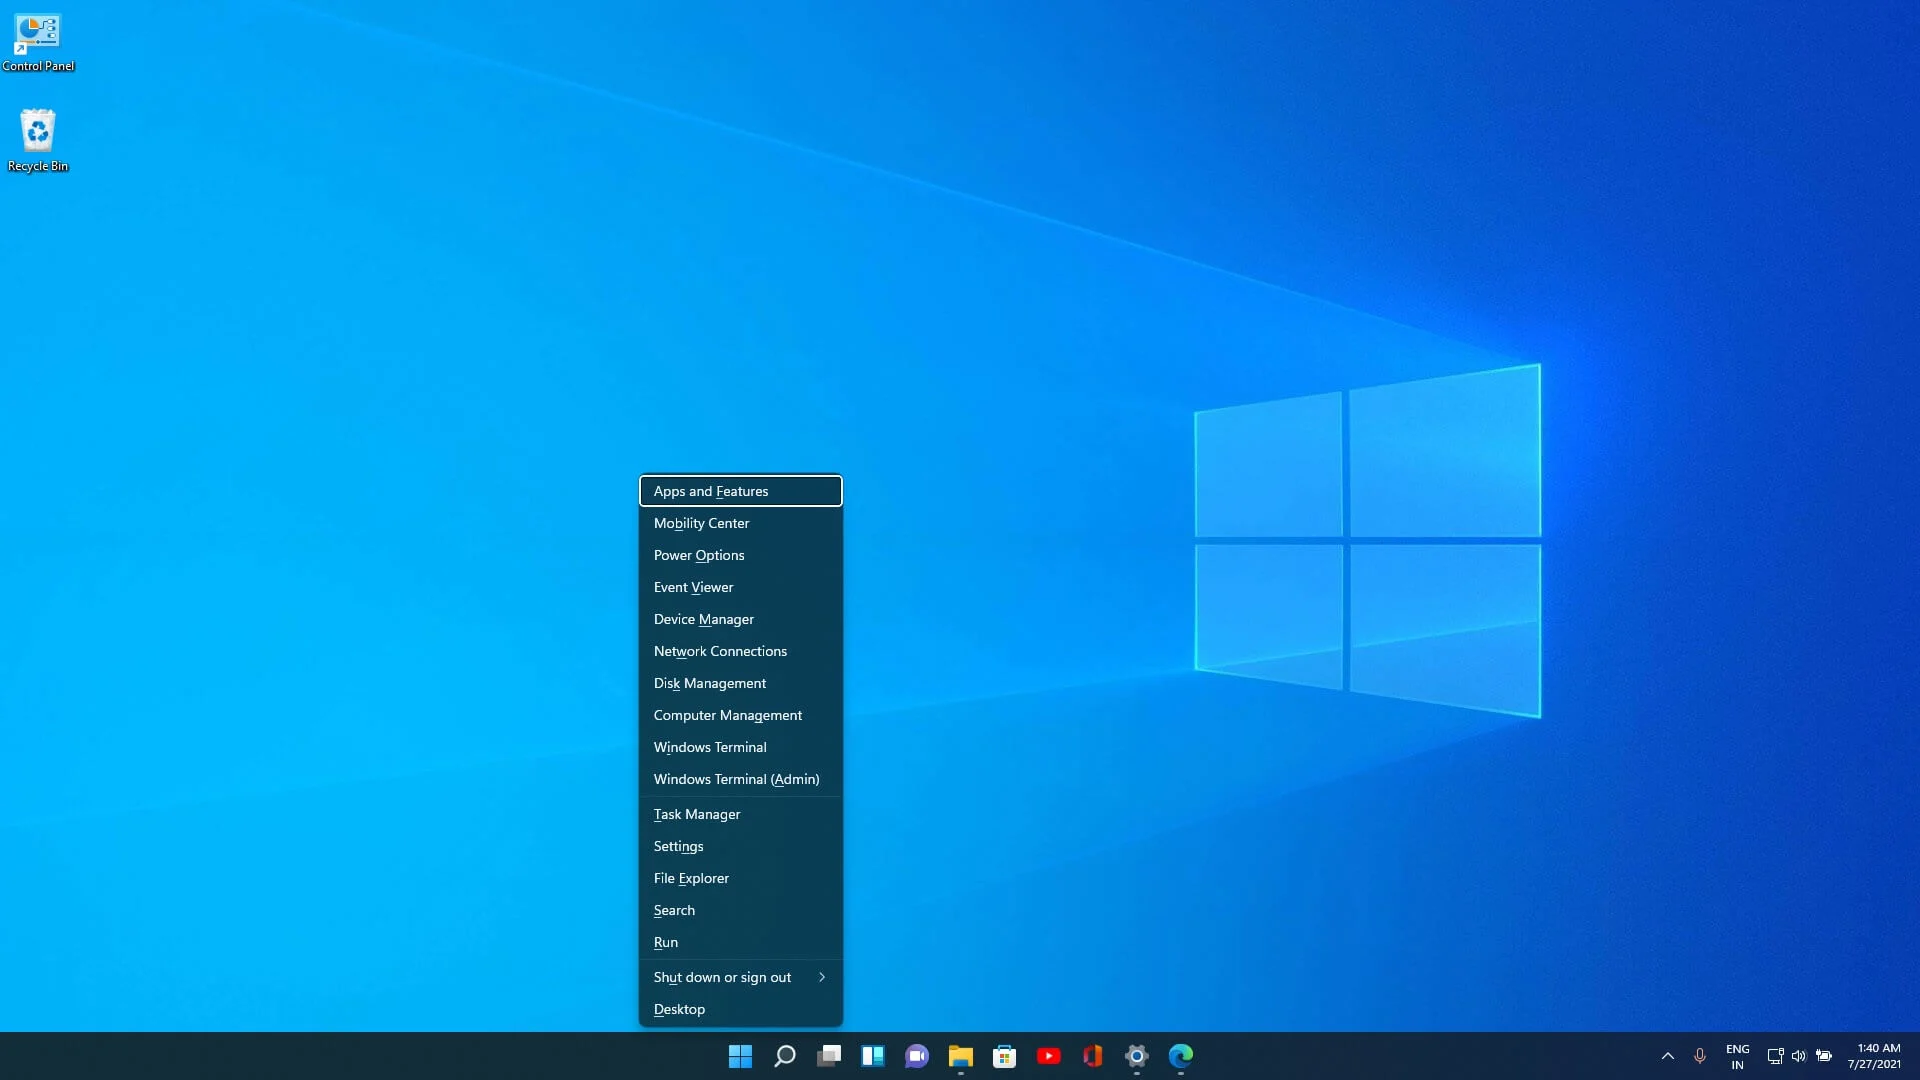 How to Remove Users From Windows 10?